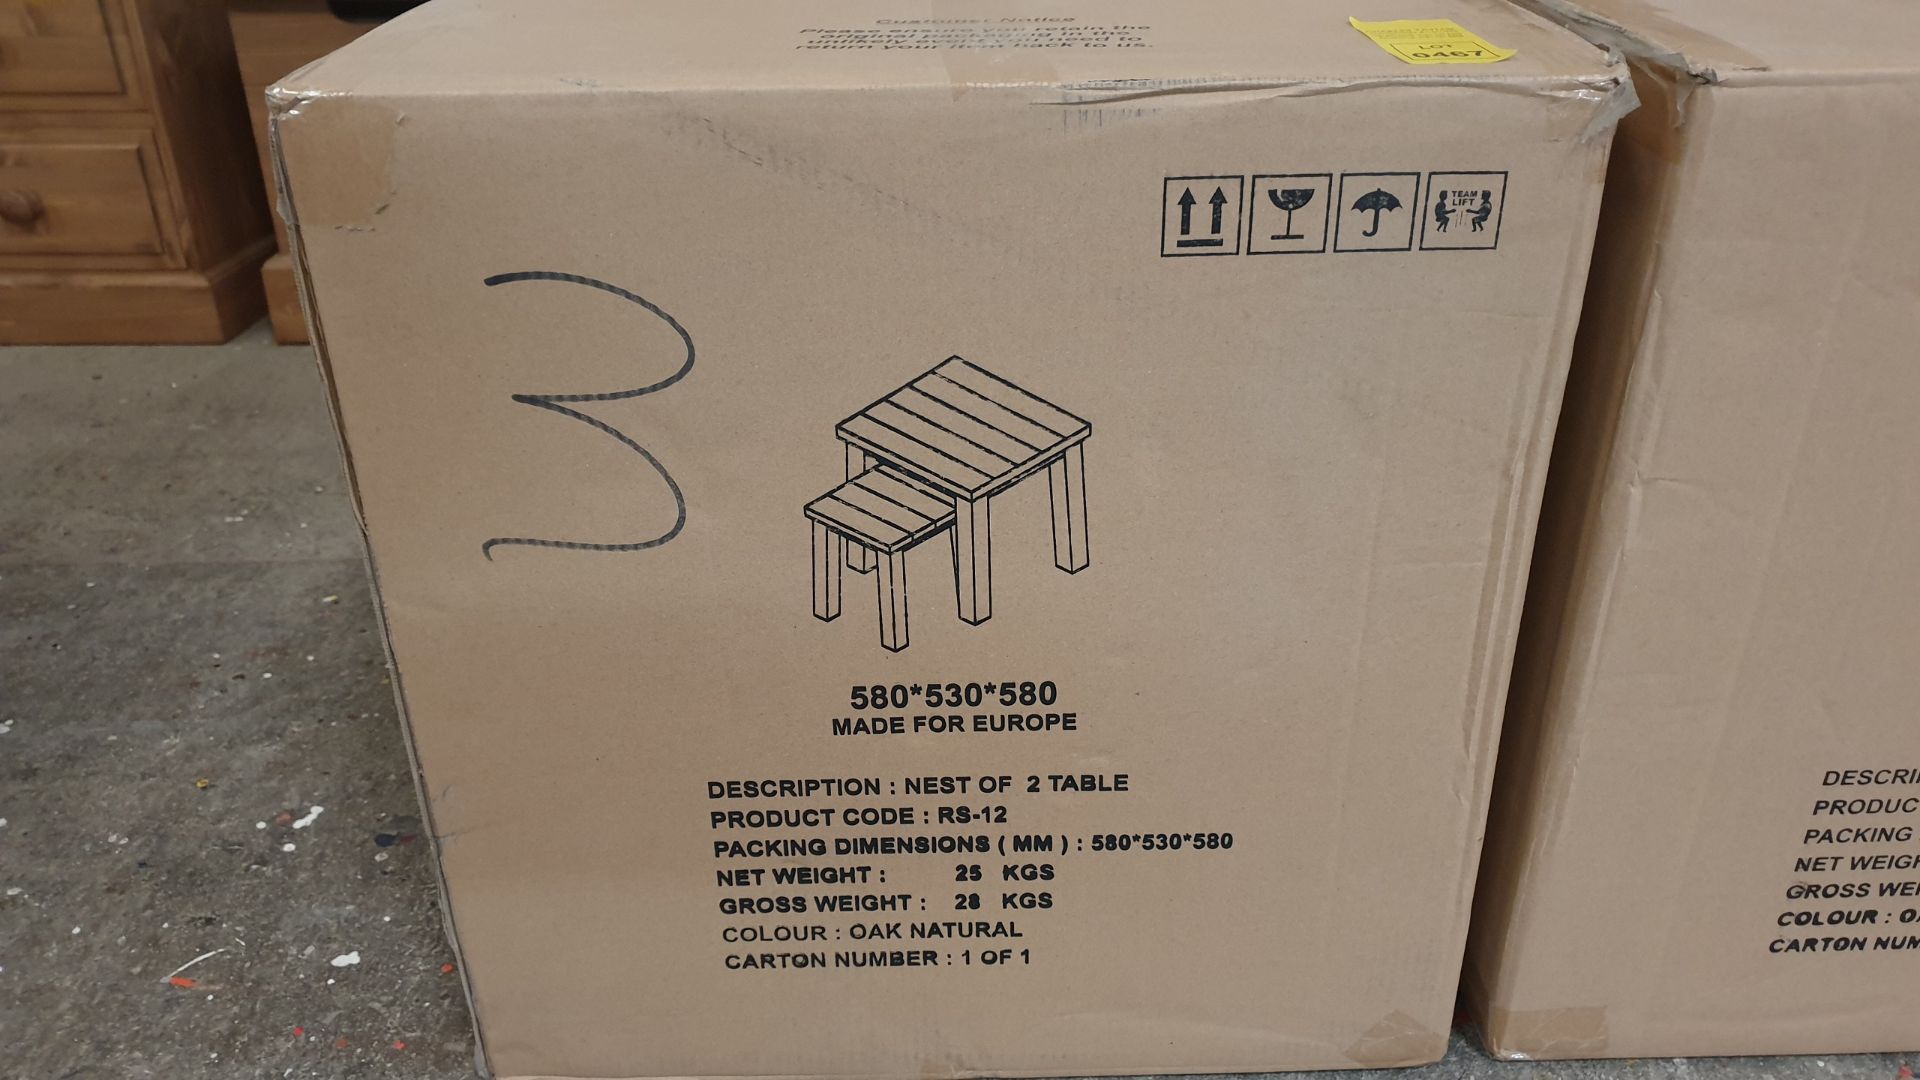 BRAND NEW BOXED NEST OF 2 TABLES